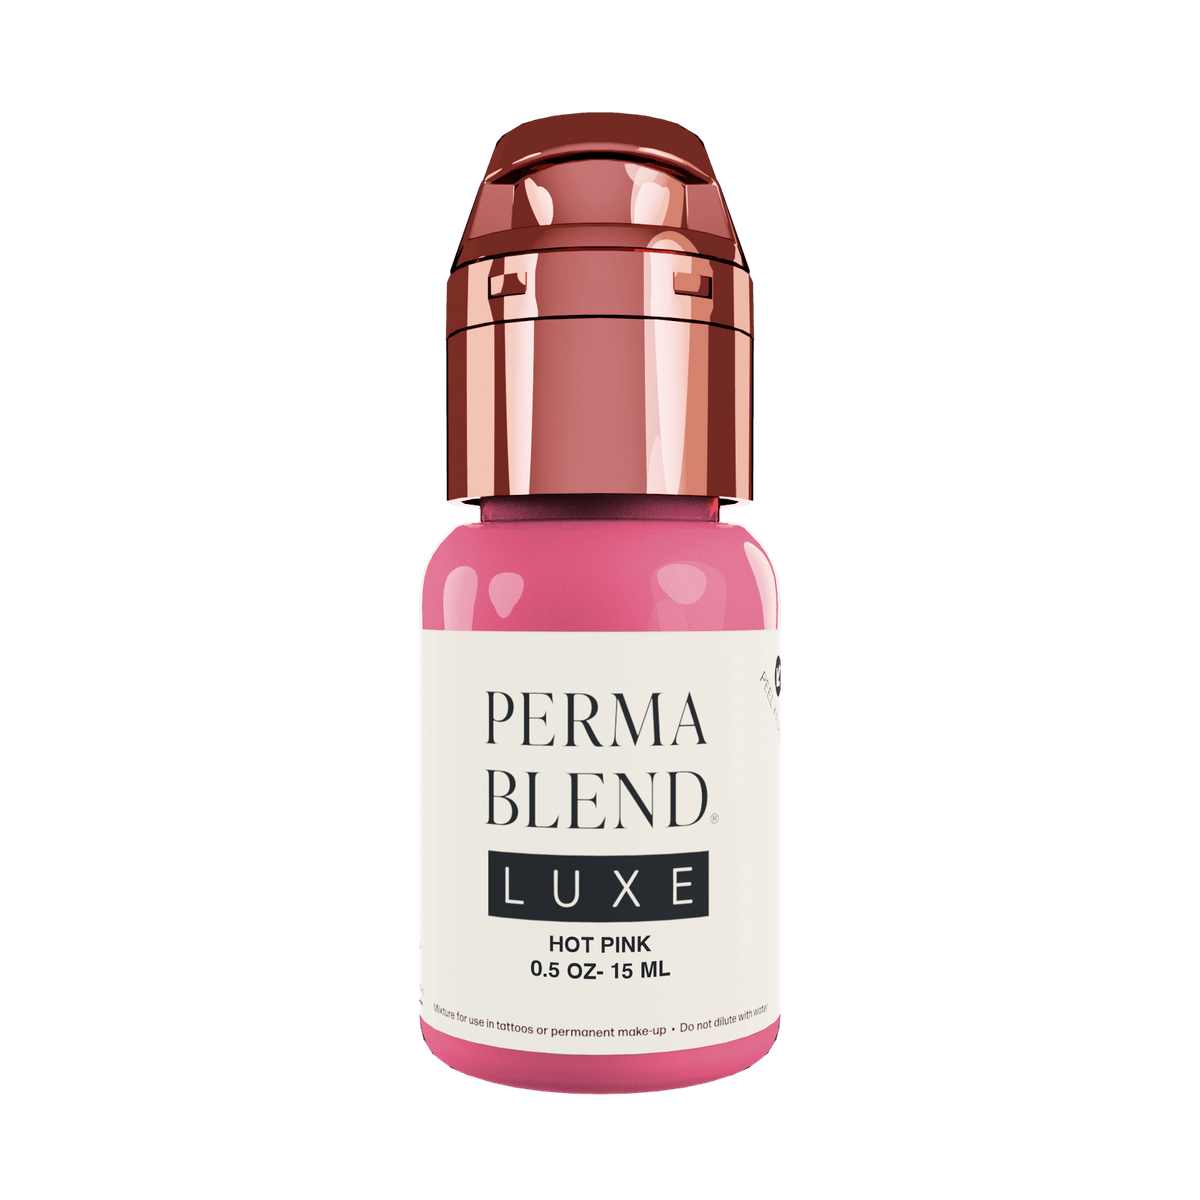 Perma Blend Luxe Hot Pink